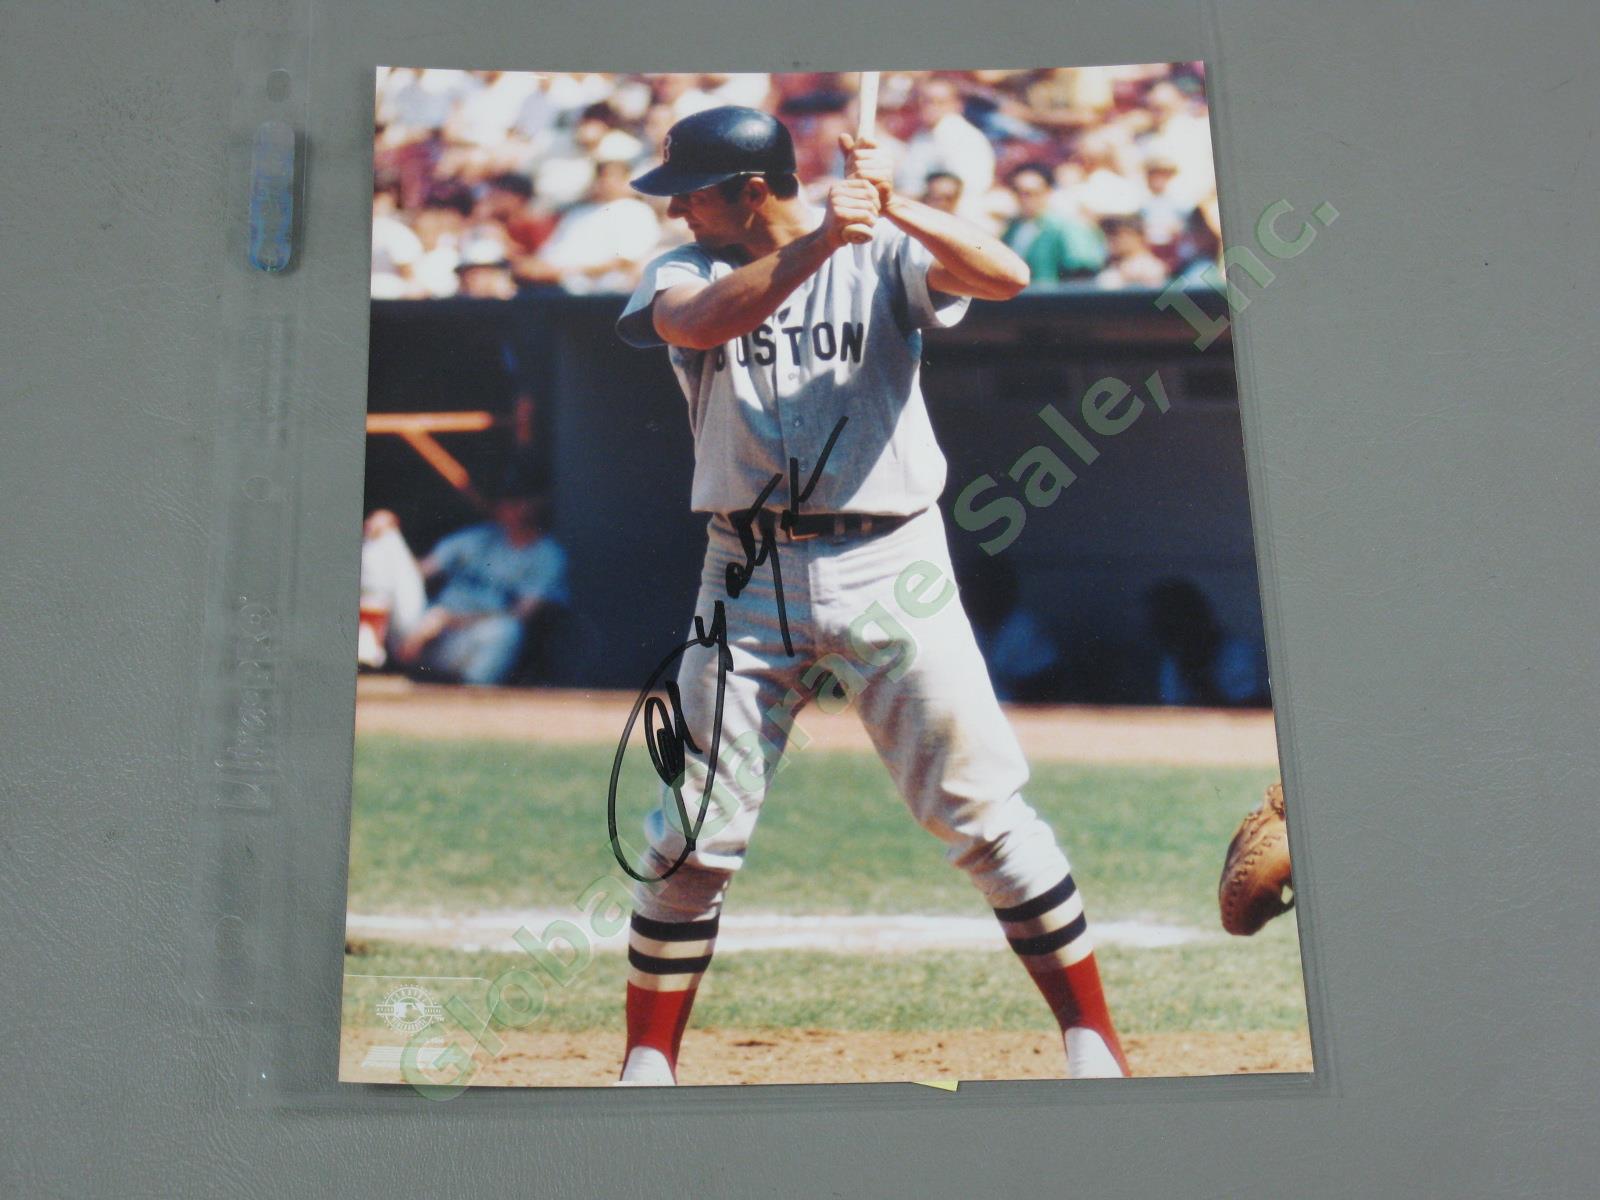 Ted Williams Last Home Run Signed 16"x20" Red Sox Photo w/COA + Yaz Autograph NR 6